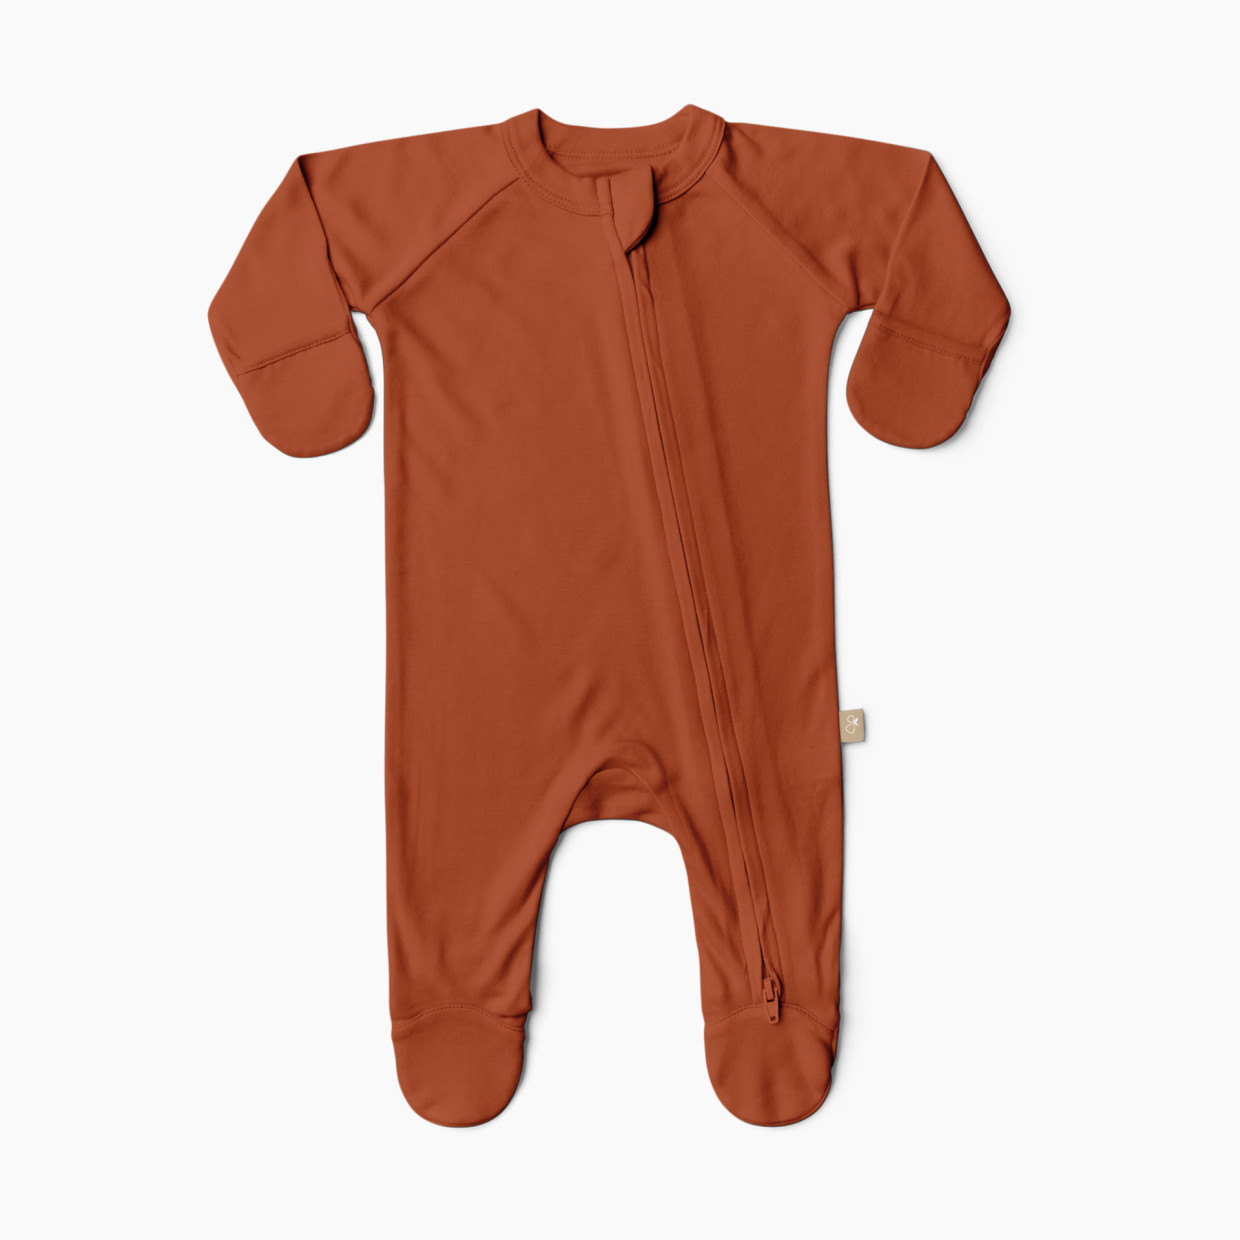 Goumi Kids x Babylist Grow With You Footie - Loose Fit - Clay, Newborn.